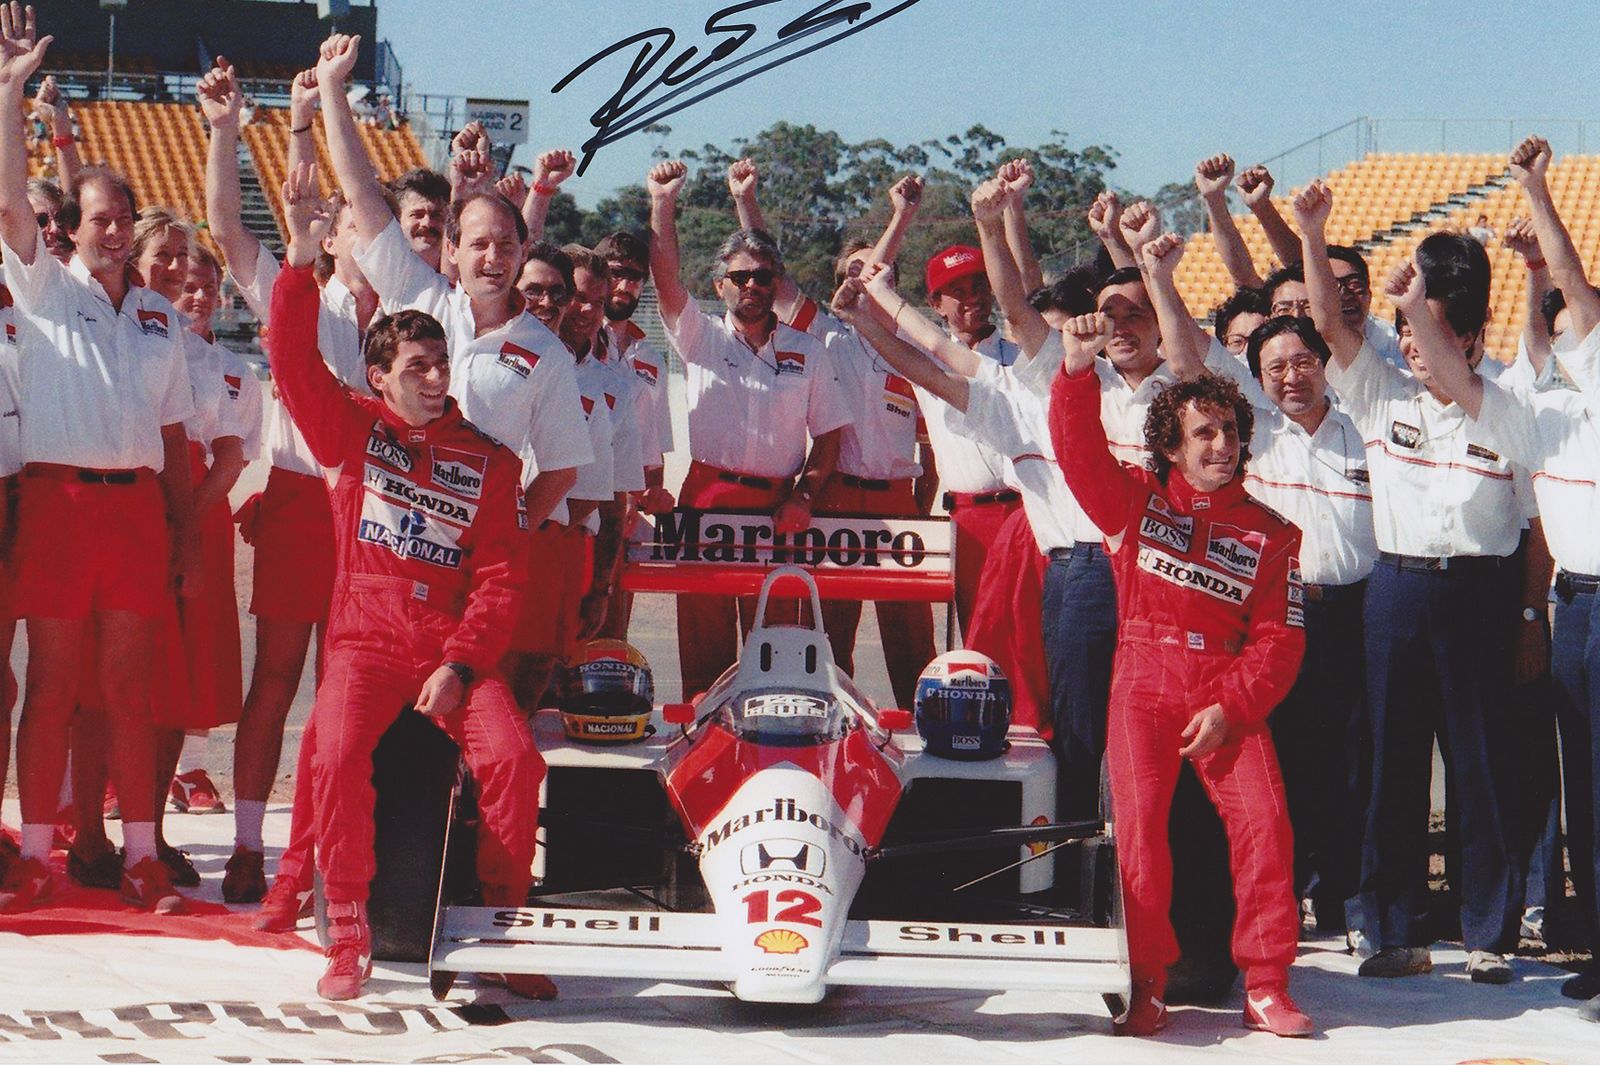 mclaren-honda-world-champion-ayrton-senna-with-his-teammate-alain-prost-and-all-members-of-the-team-staff-12-november-1988-signed-by-dennis.jpg